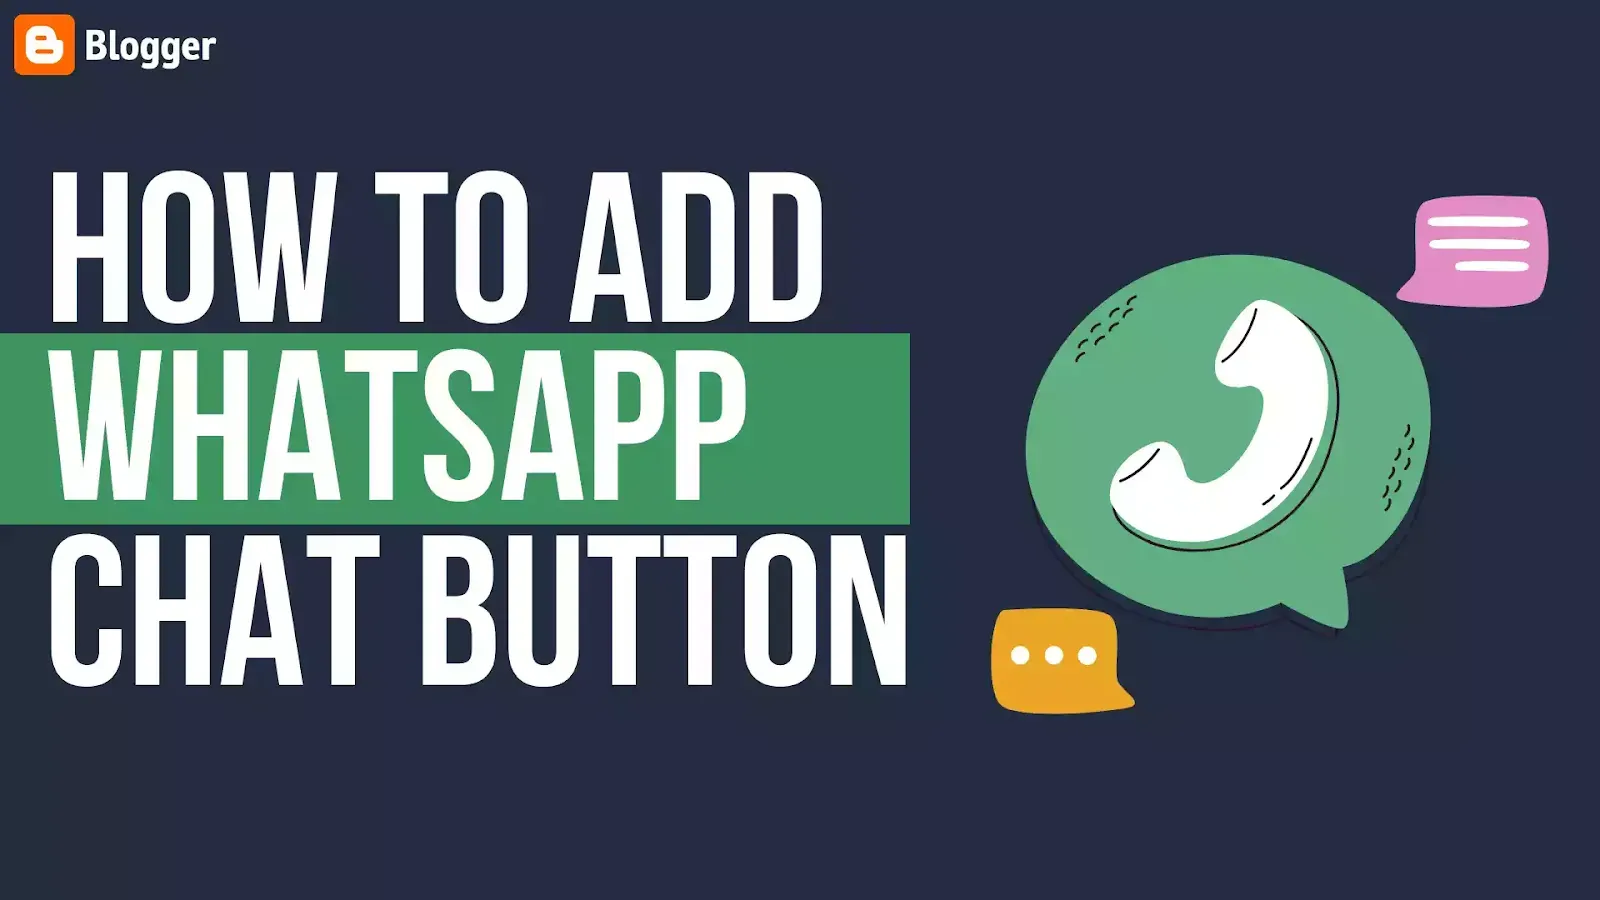 How to add WhatsApp chat button in Blogger